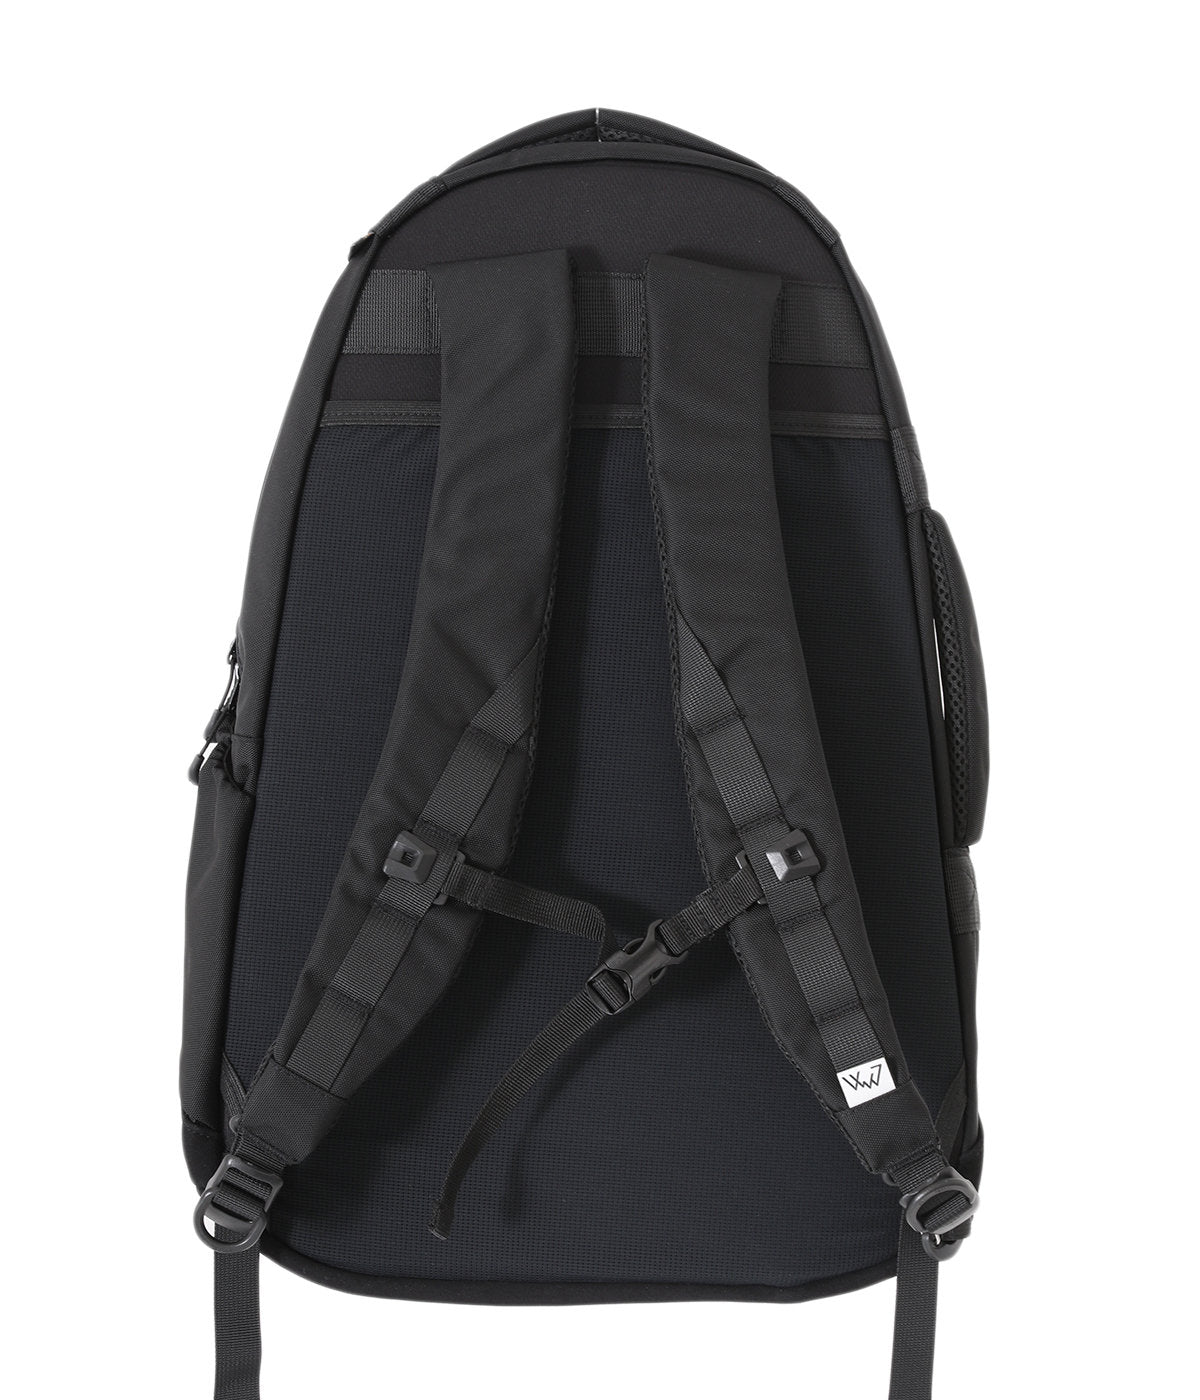 COMFY OUTDOOR GARMENT THE JAM Backpack